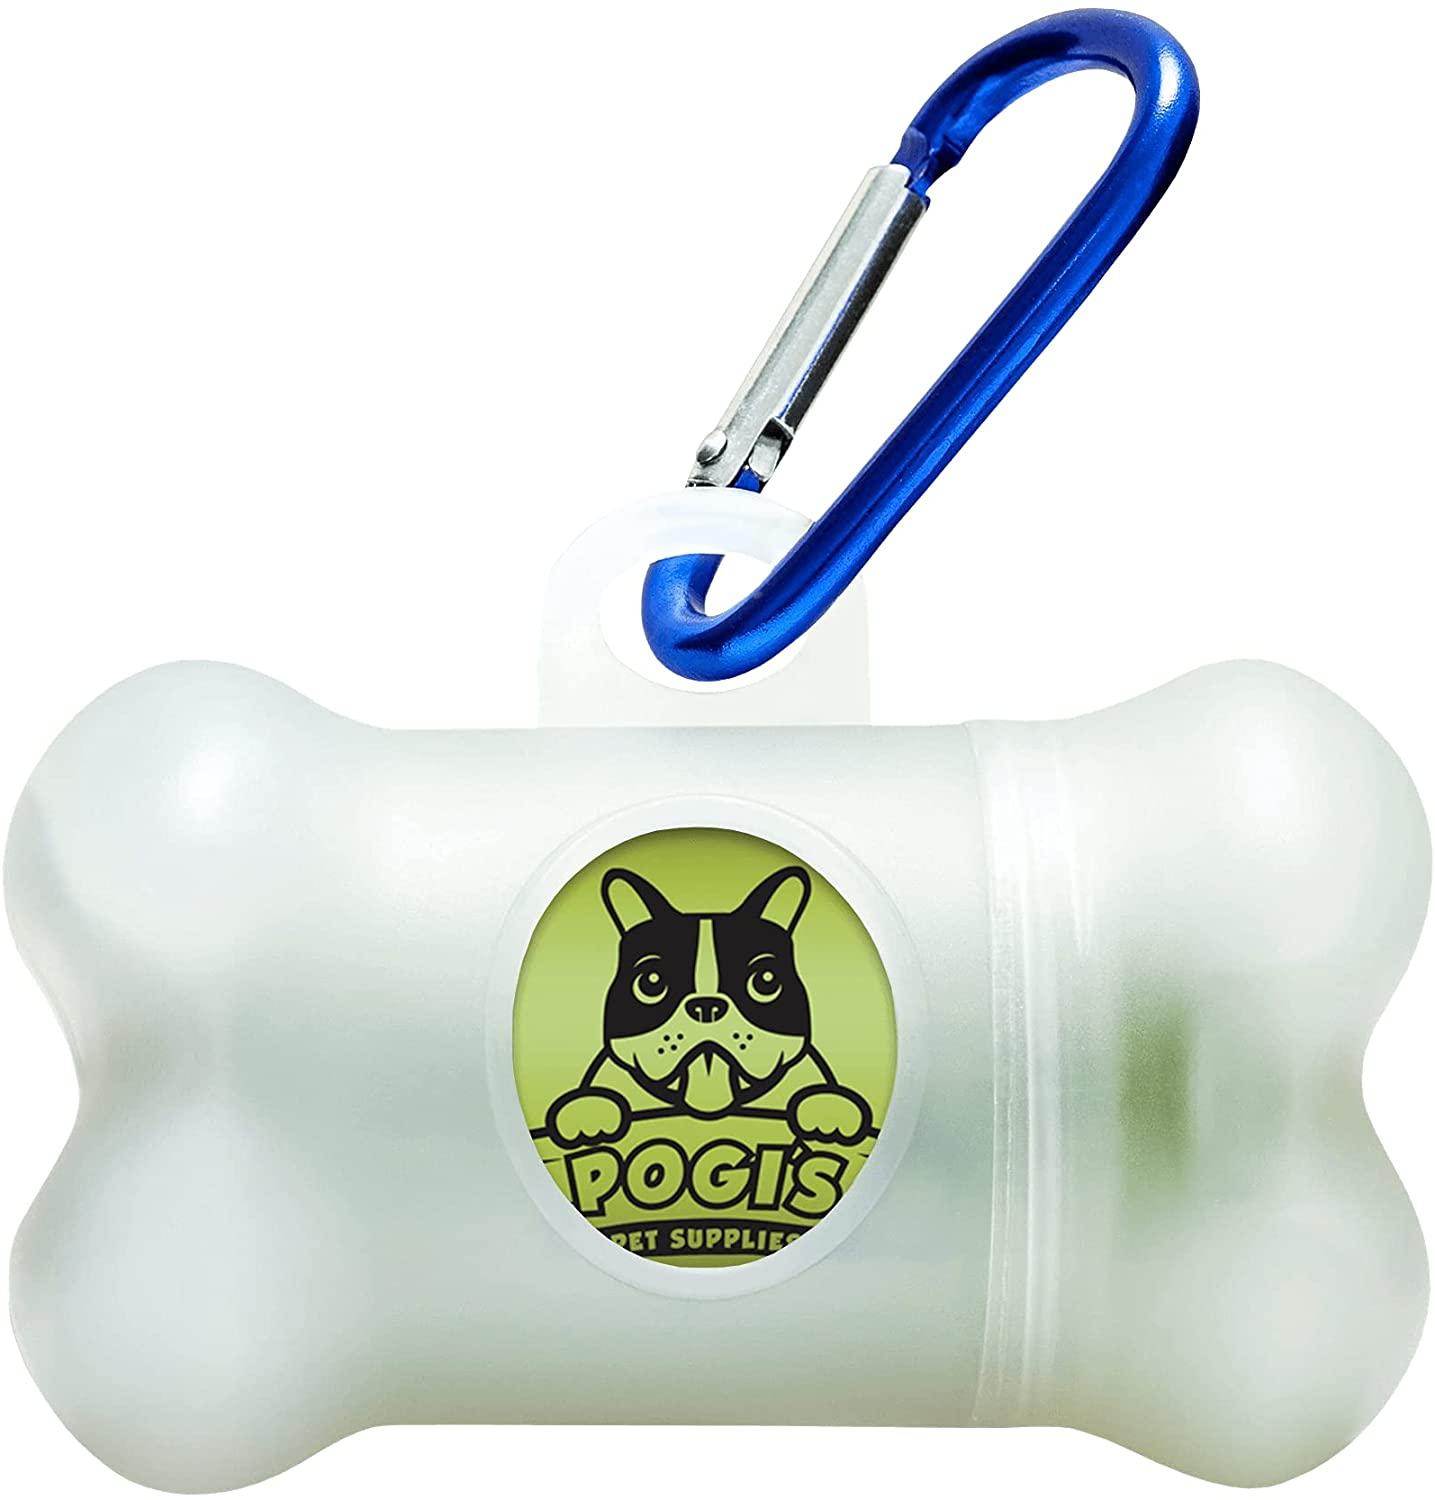 Biodegradable Large Dog Poop Bags With Handles On Amazon Pogi’s Pet Supplies